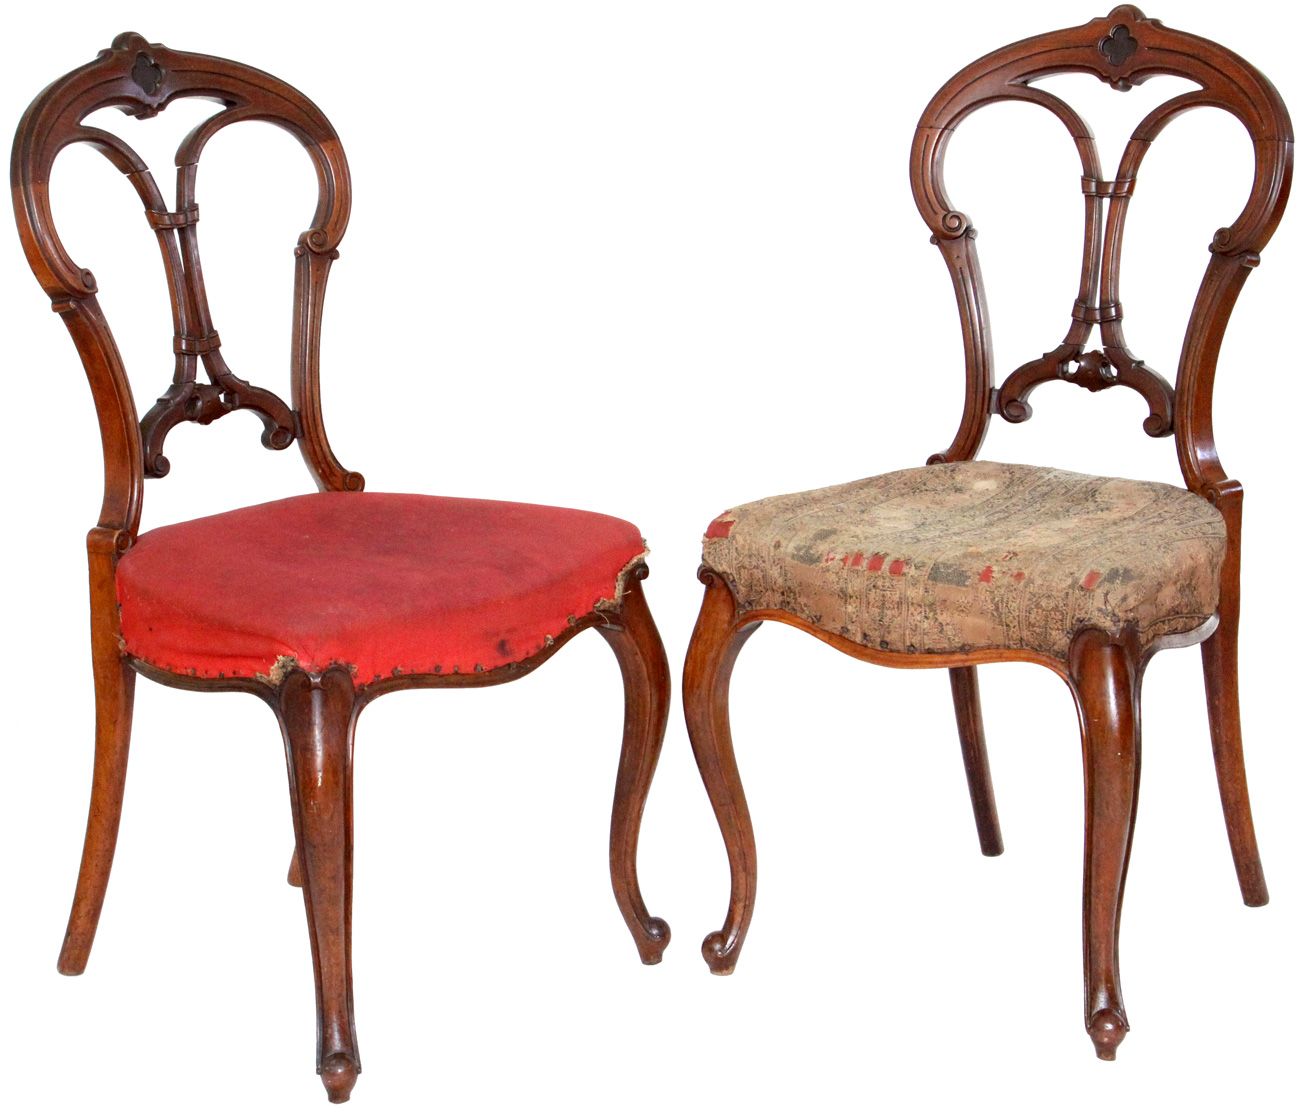 Genuine Antique Victorian Balloon Back Chairs - Carved Back - Upholstered Seat - Cabriole Front Legs - Back To List of Antique Furniture